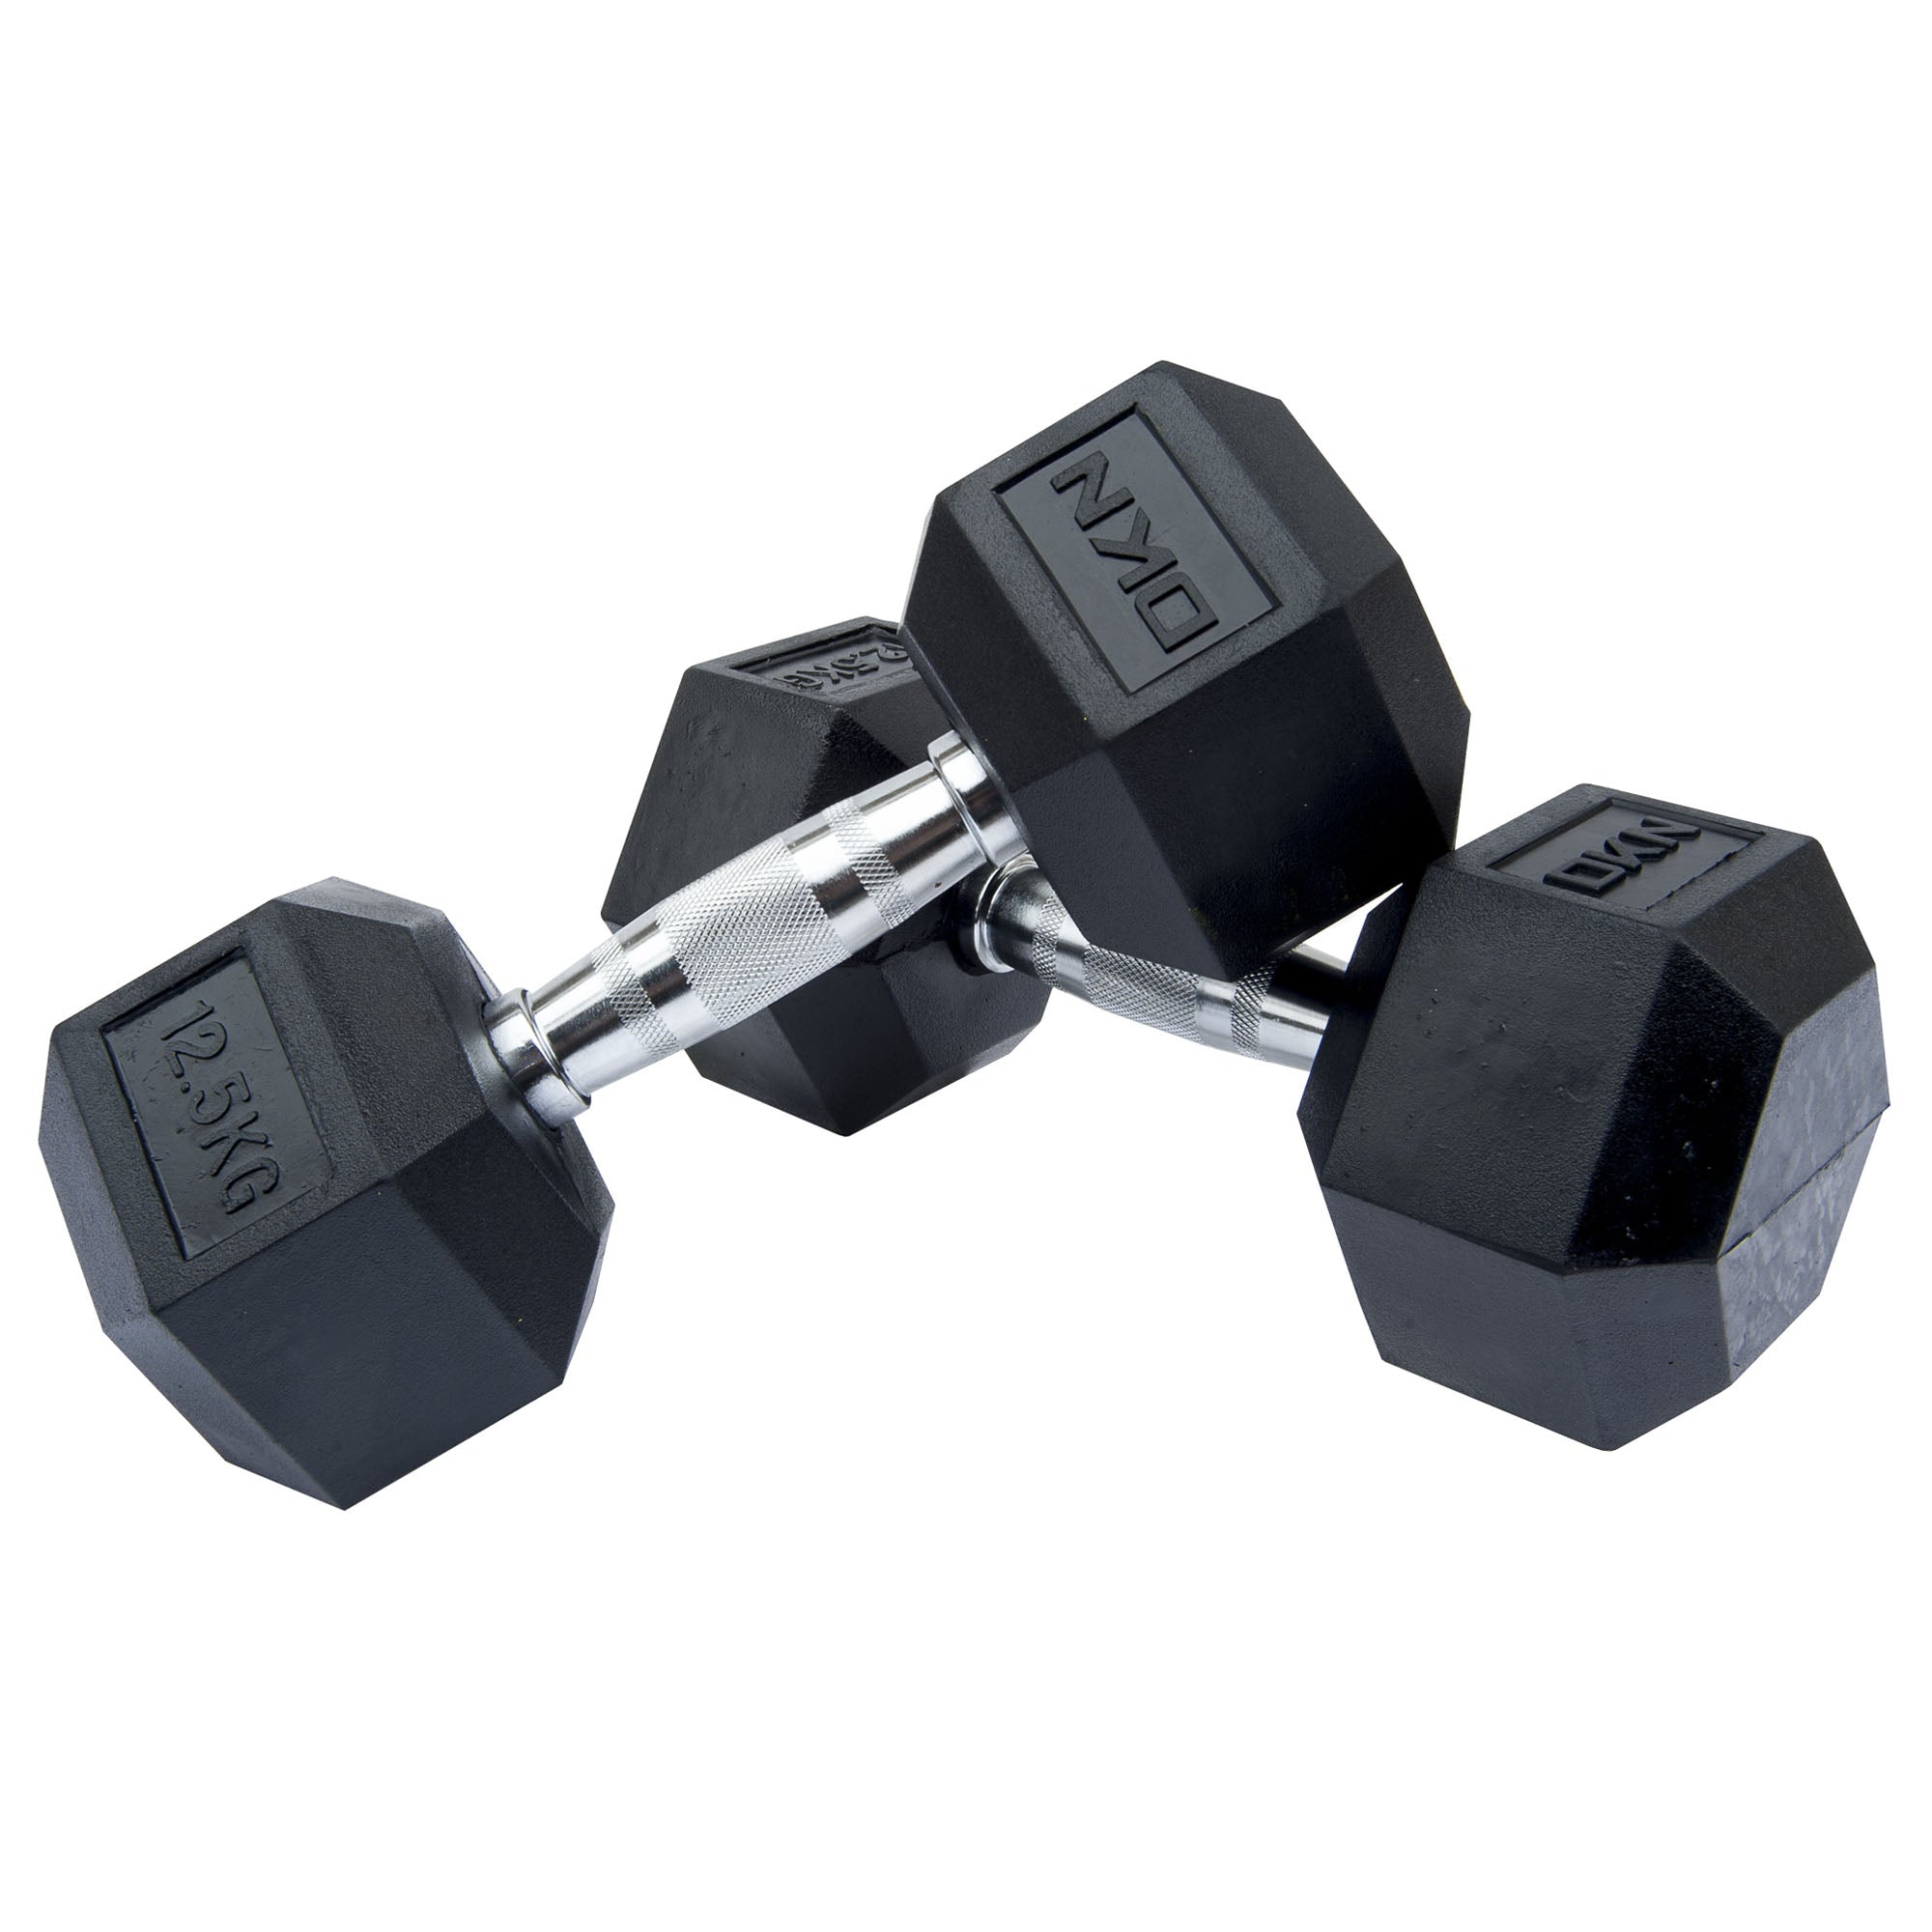 Image of DKN Rubber Hex Dumbbells